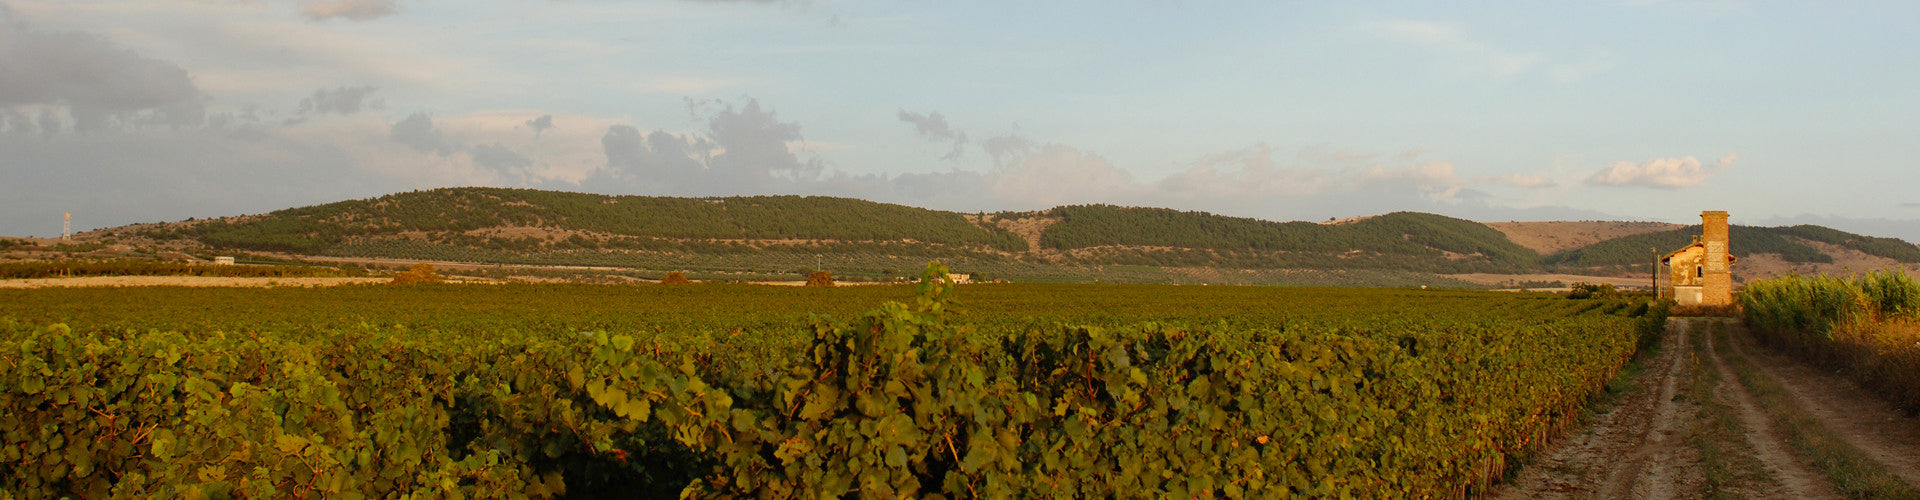 Tormaresca Vineyards in Puglia, Southern Italy